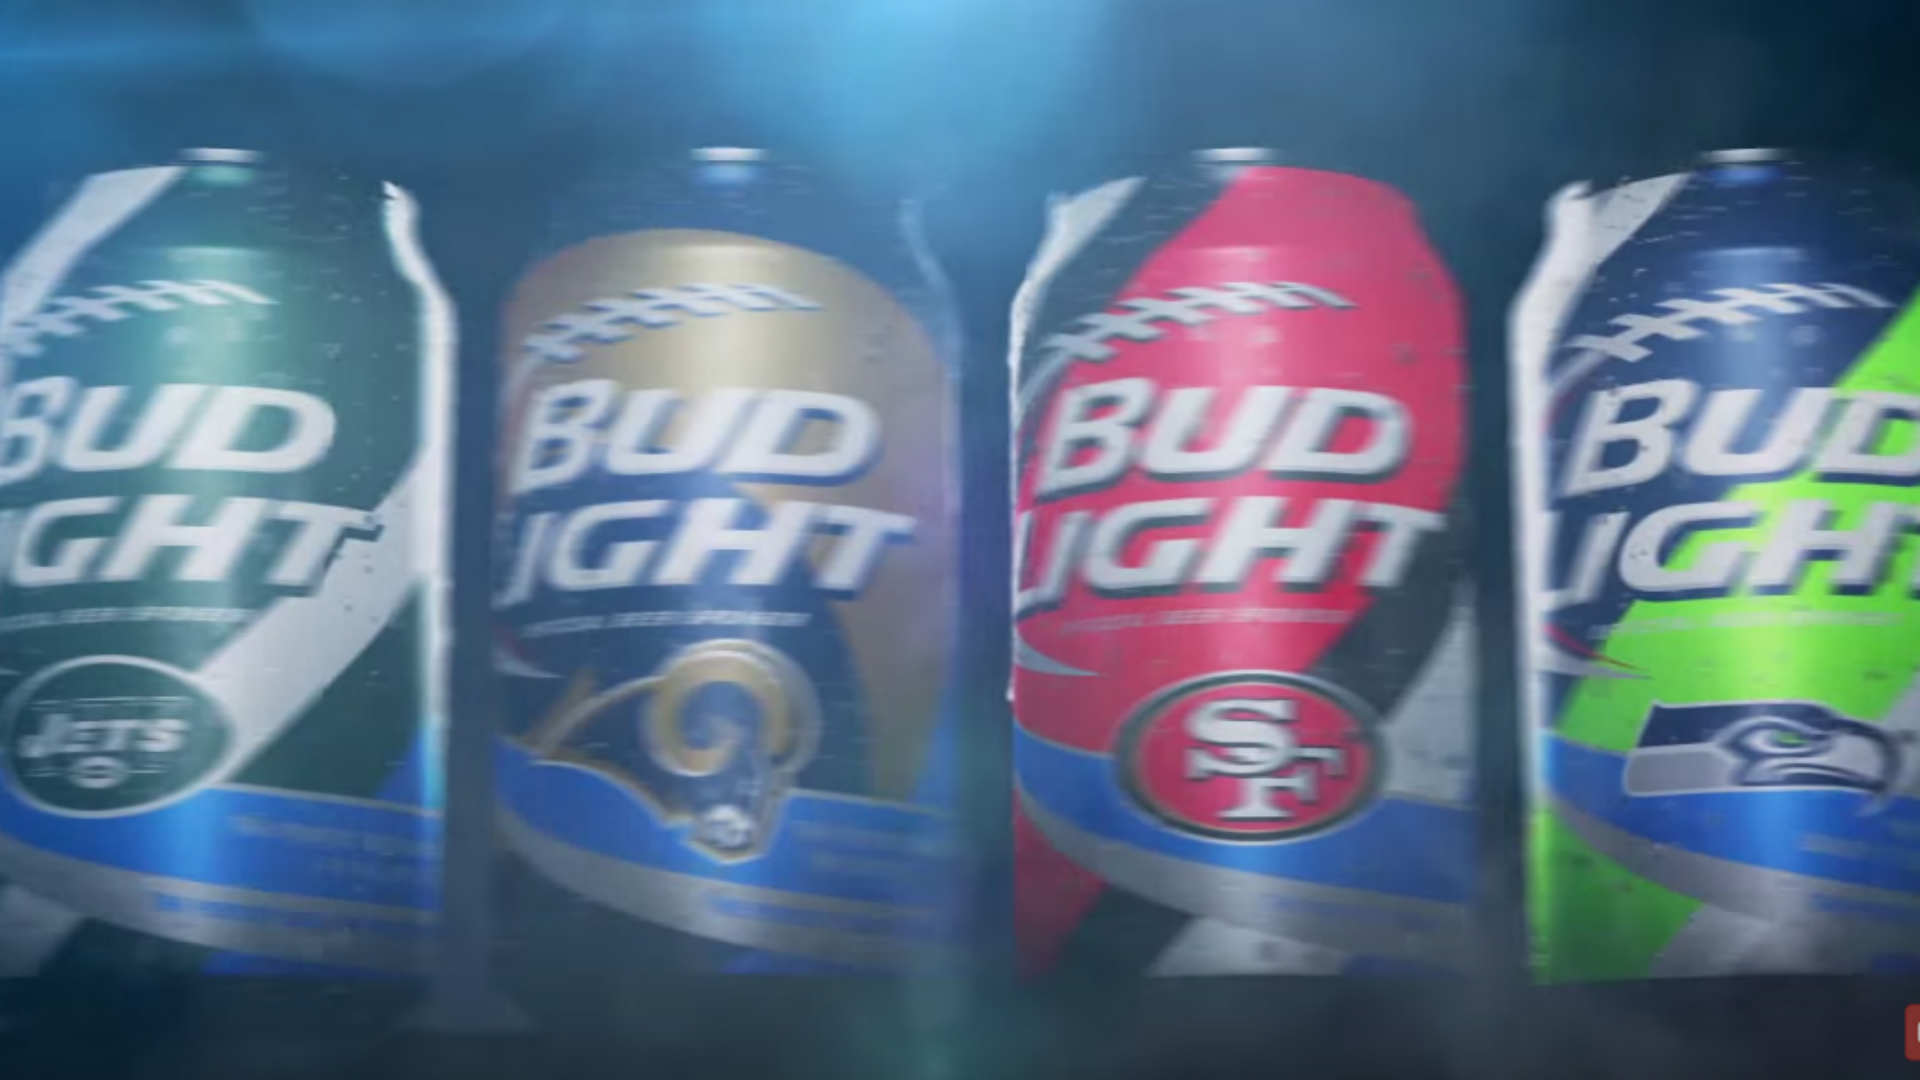 Bud Light introduces new cans for 28 NFL teams | NFL | Sporting News1920 x 1080